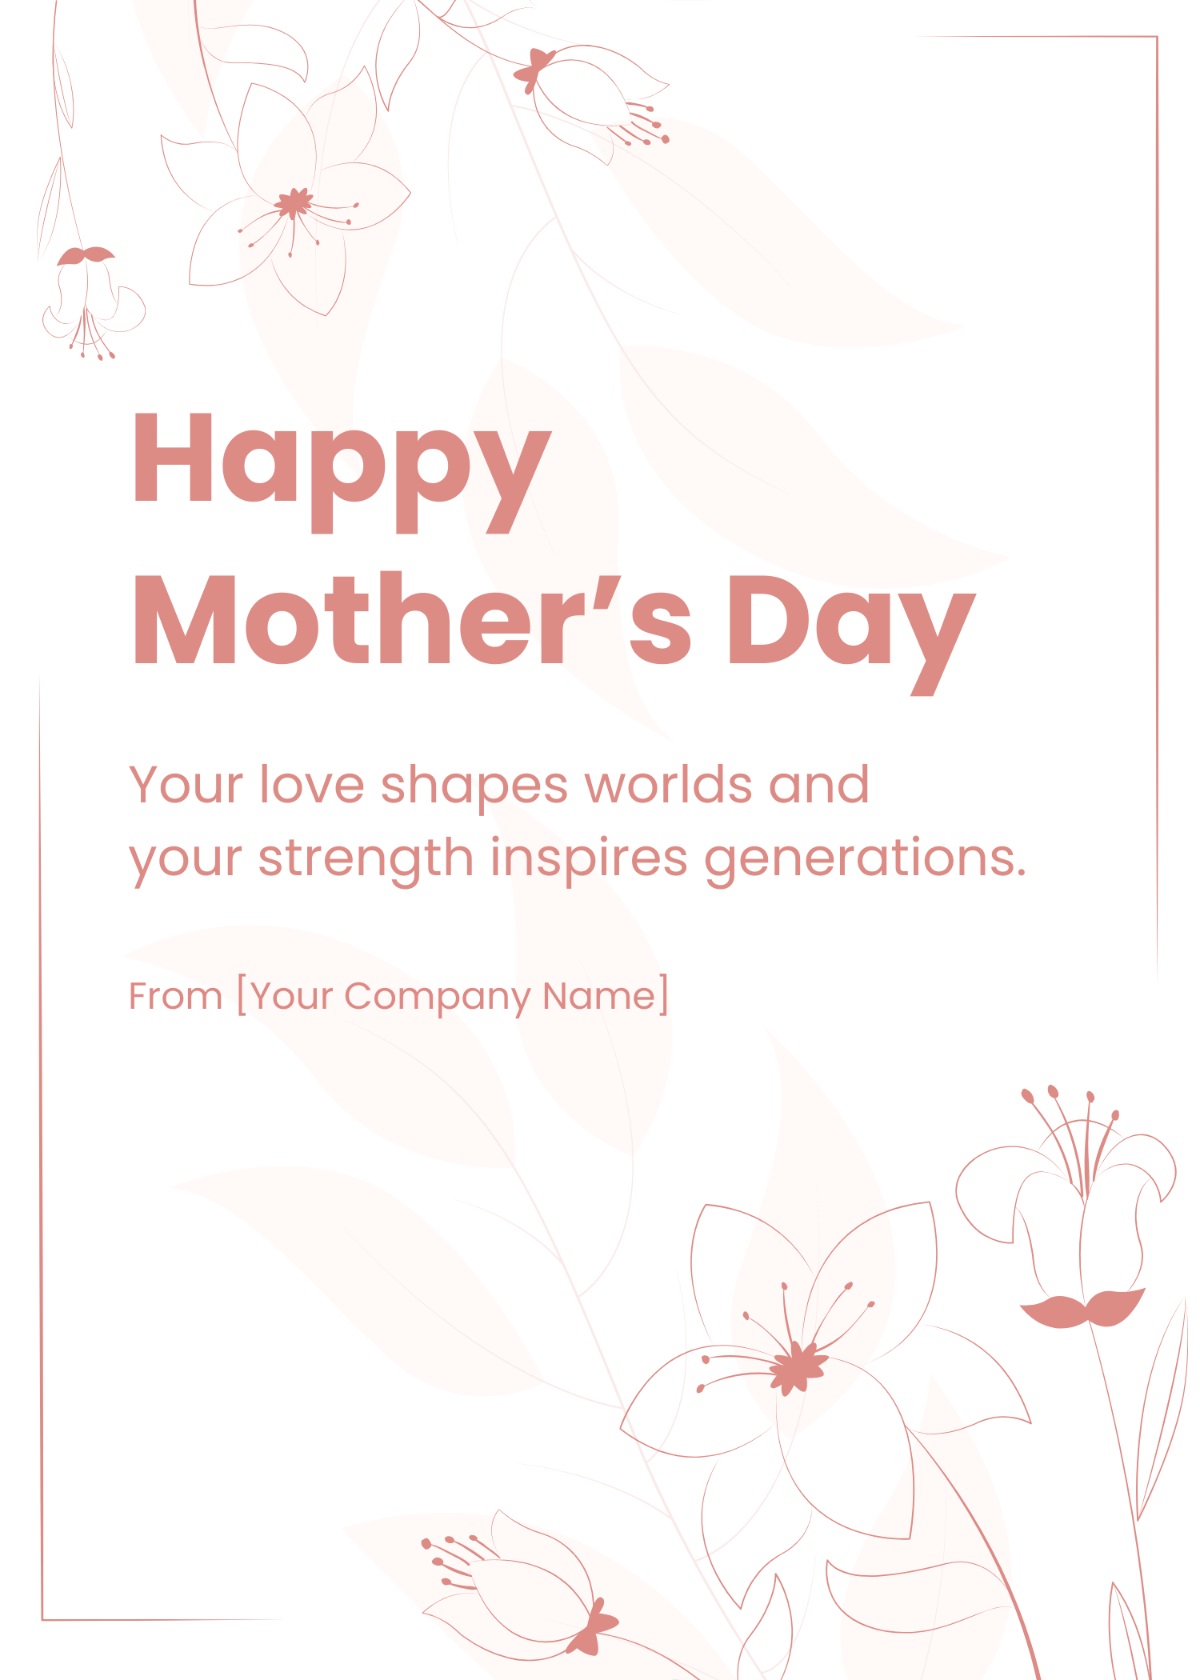 Mother's Day Message Template